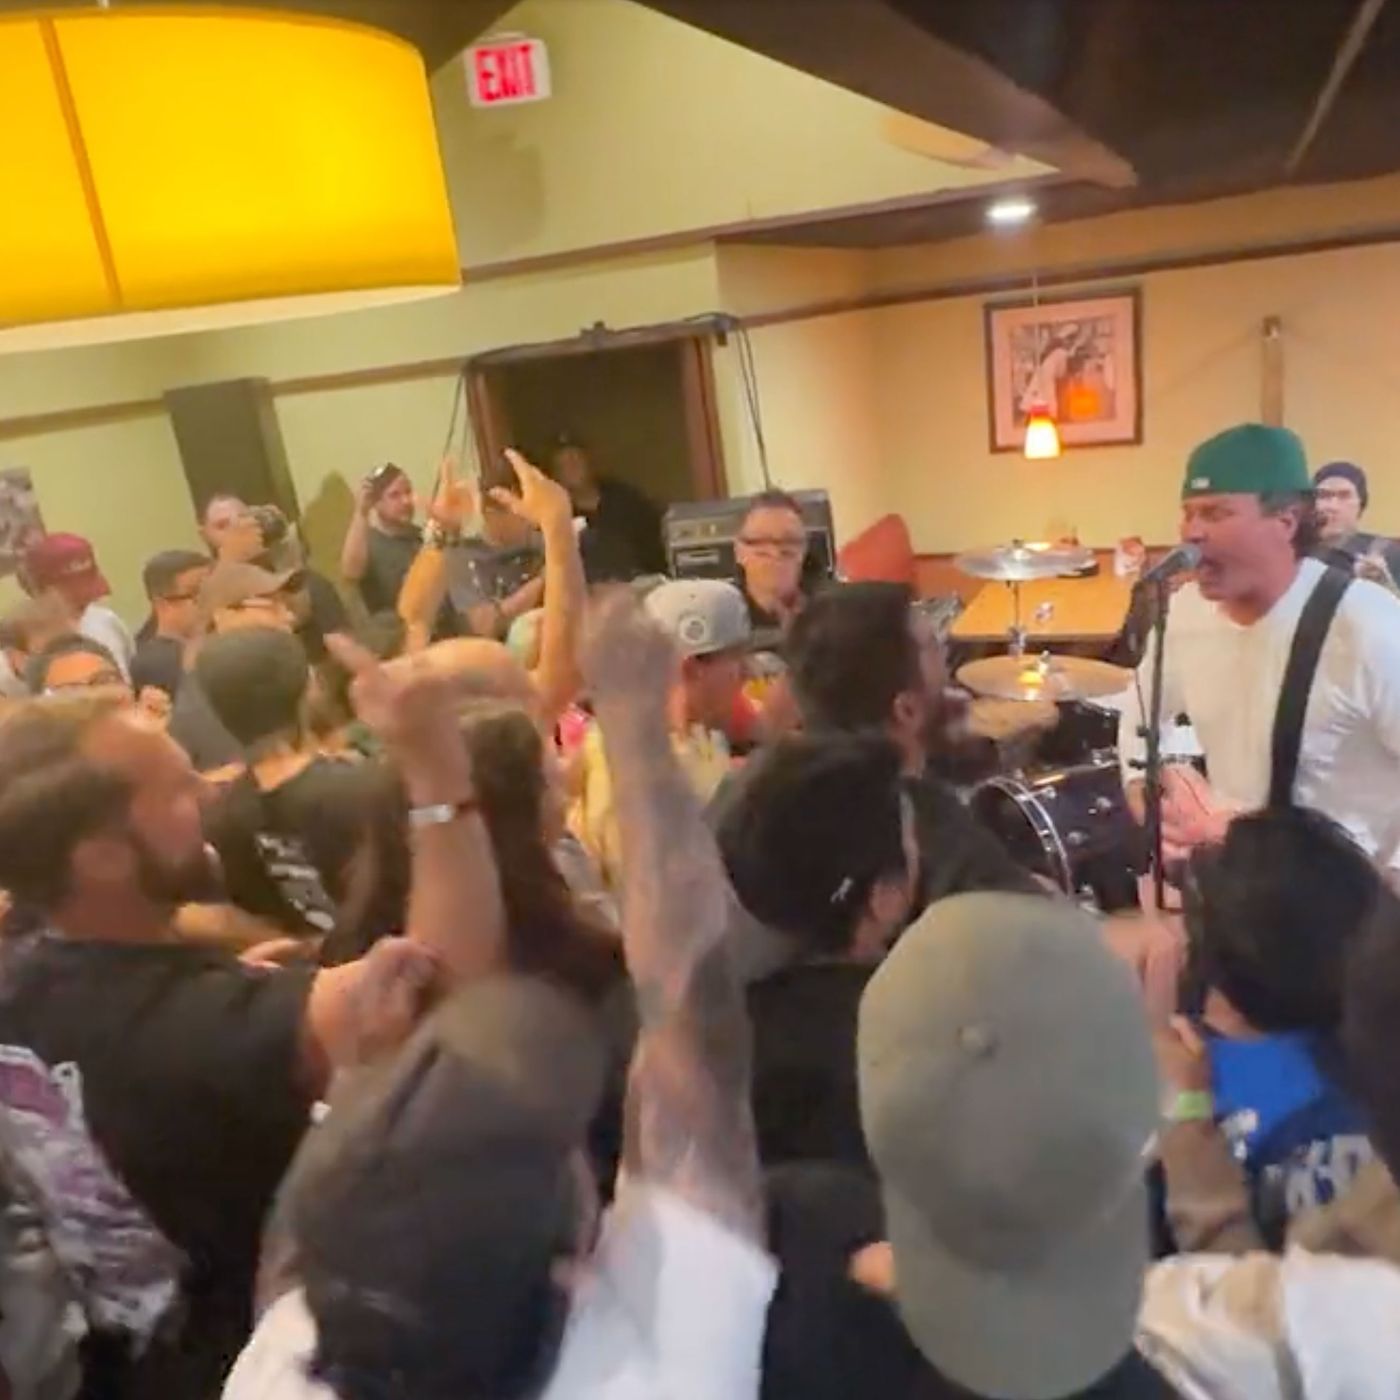 Blink-182 Perform at Denny's for 'What the F Is Up' Meme